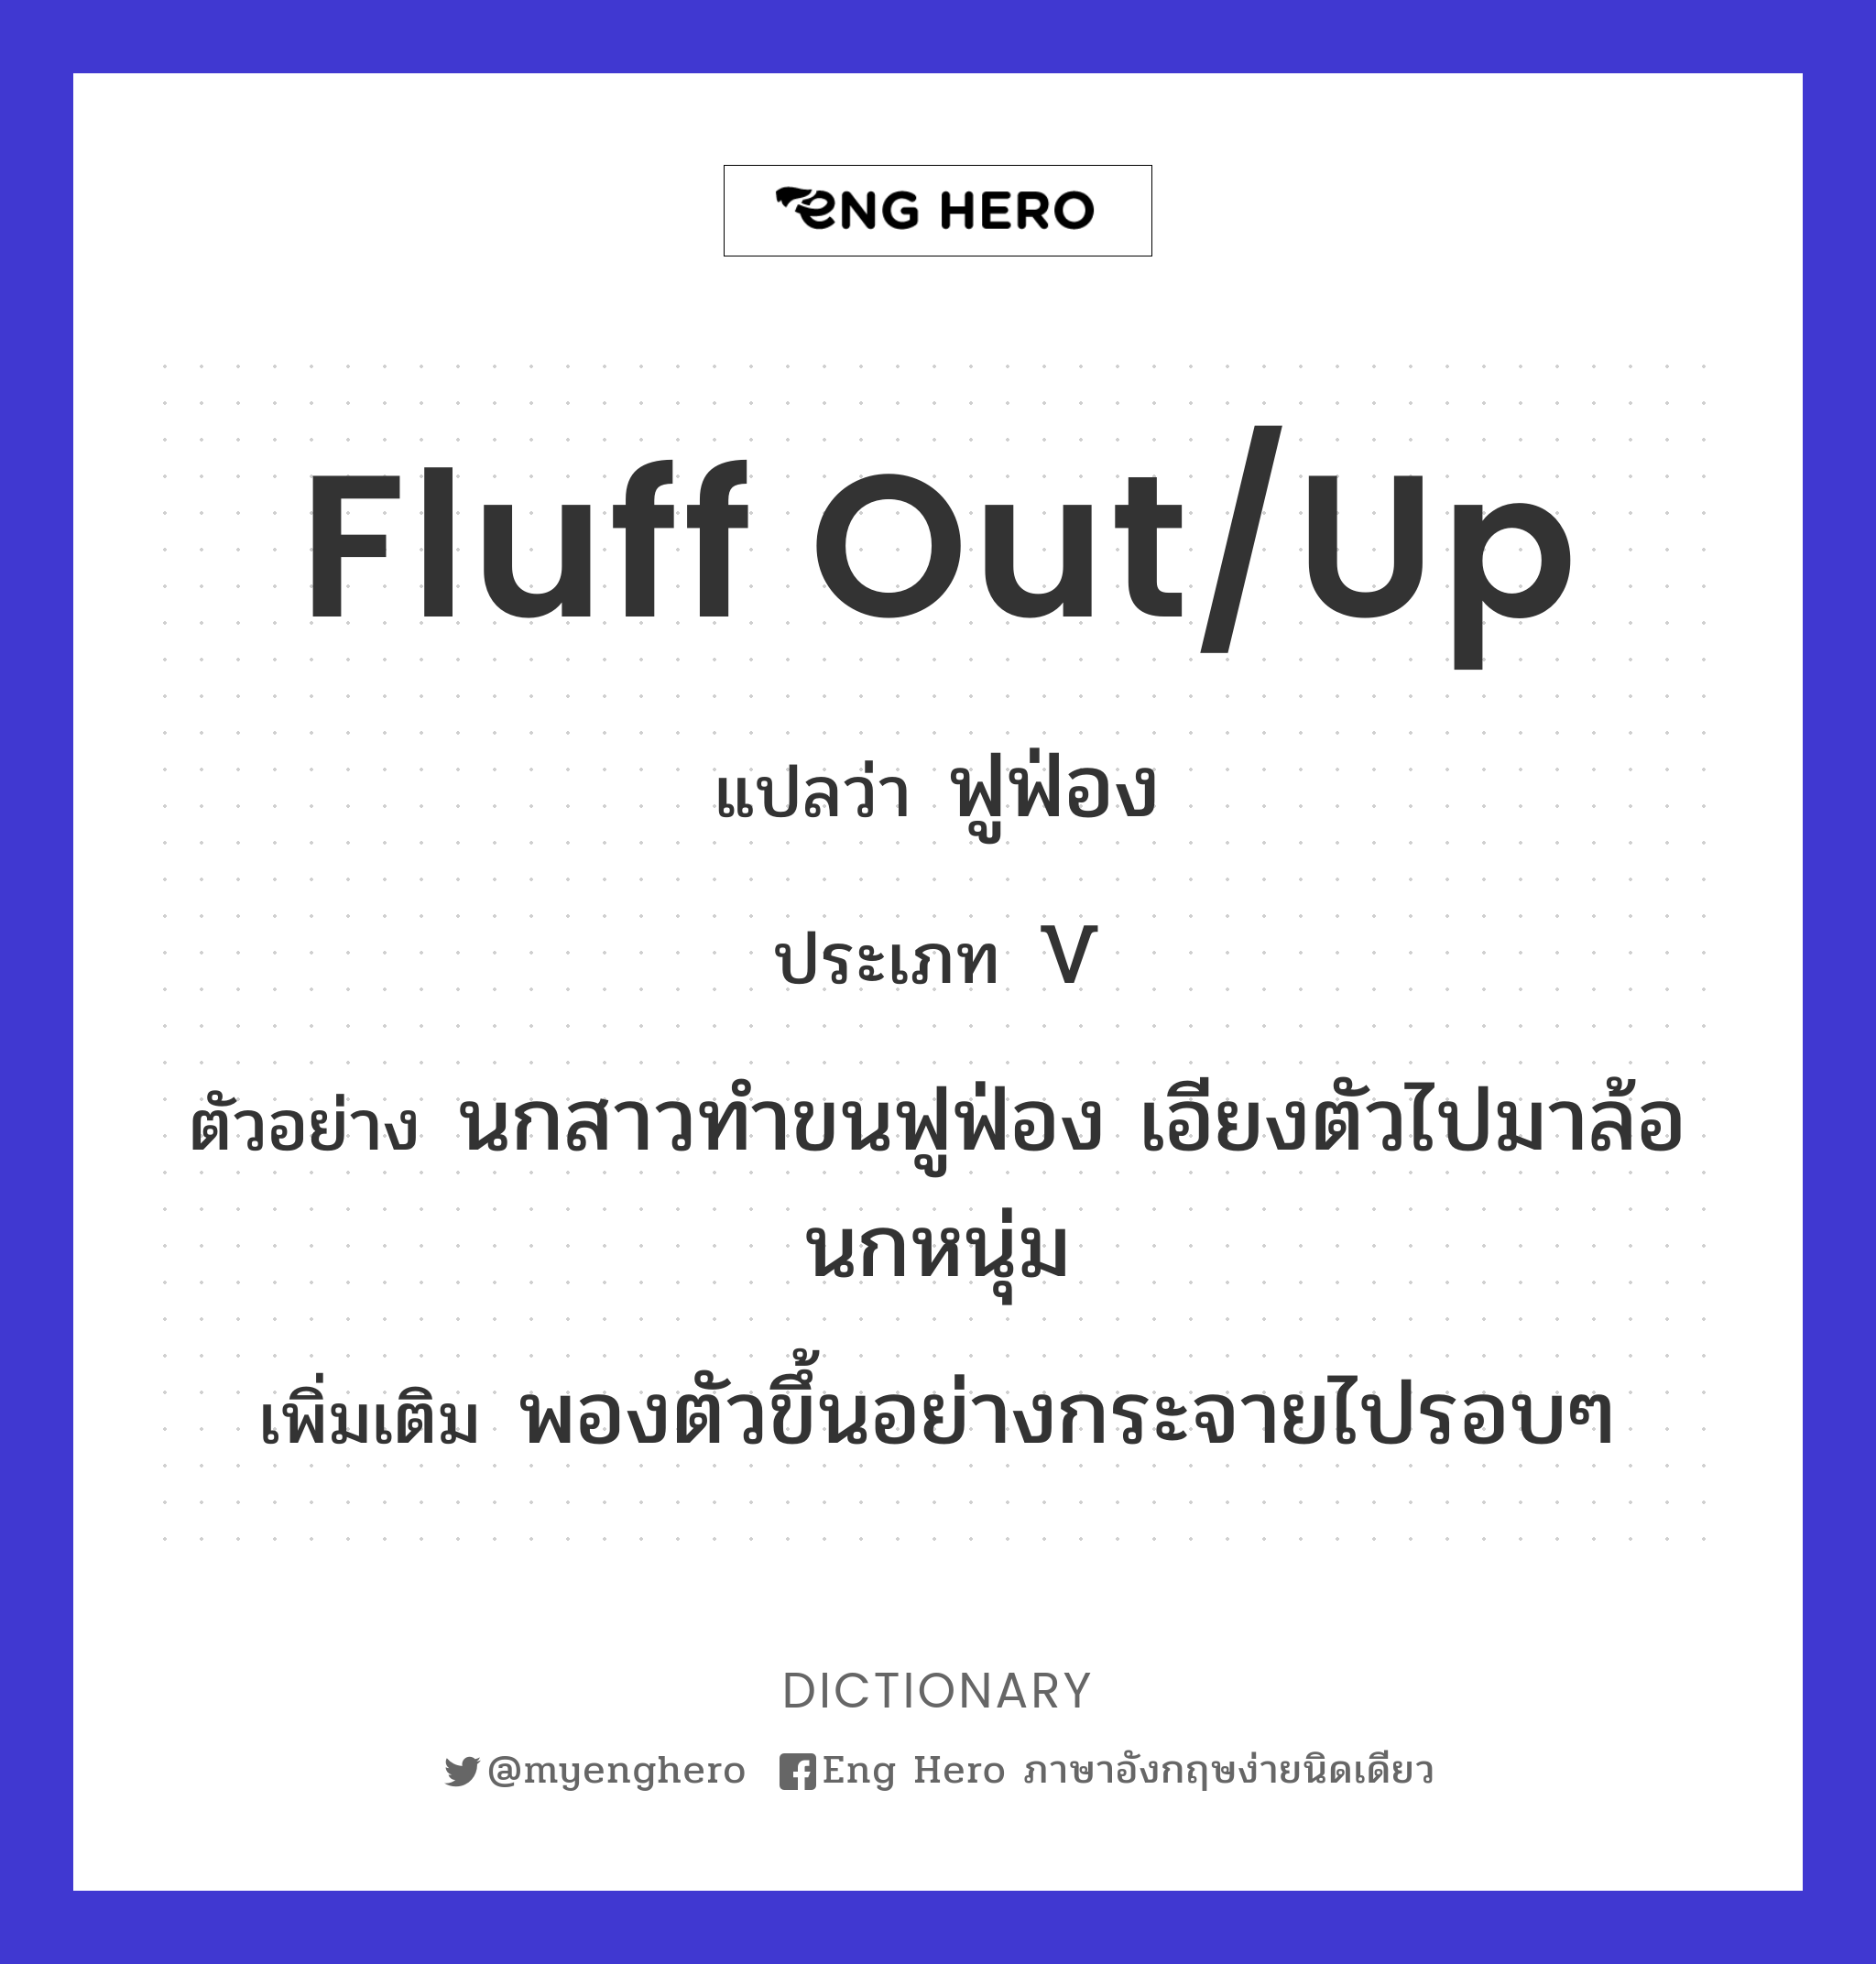 fluff out/up